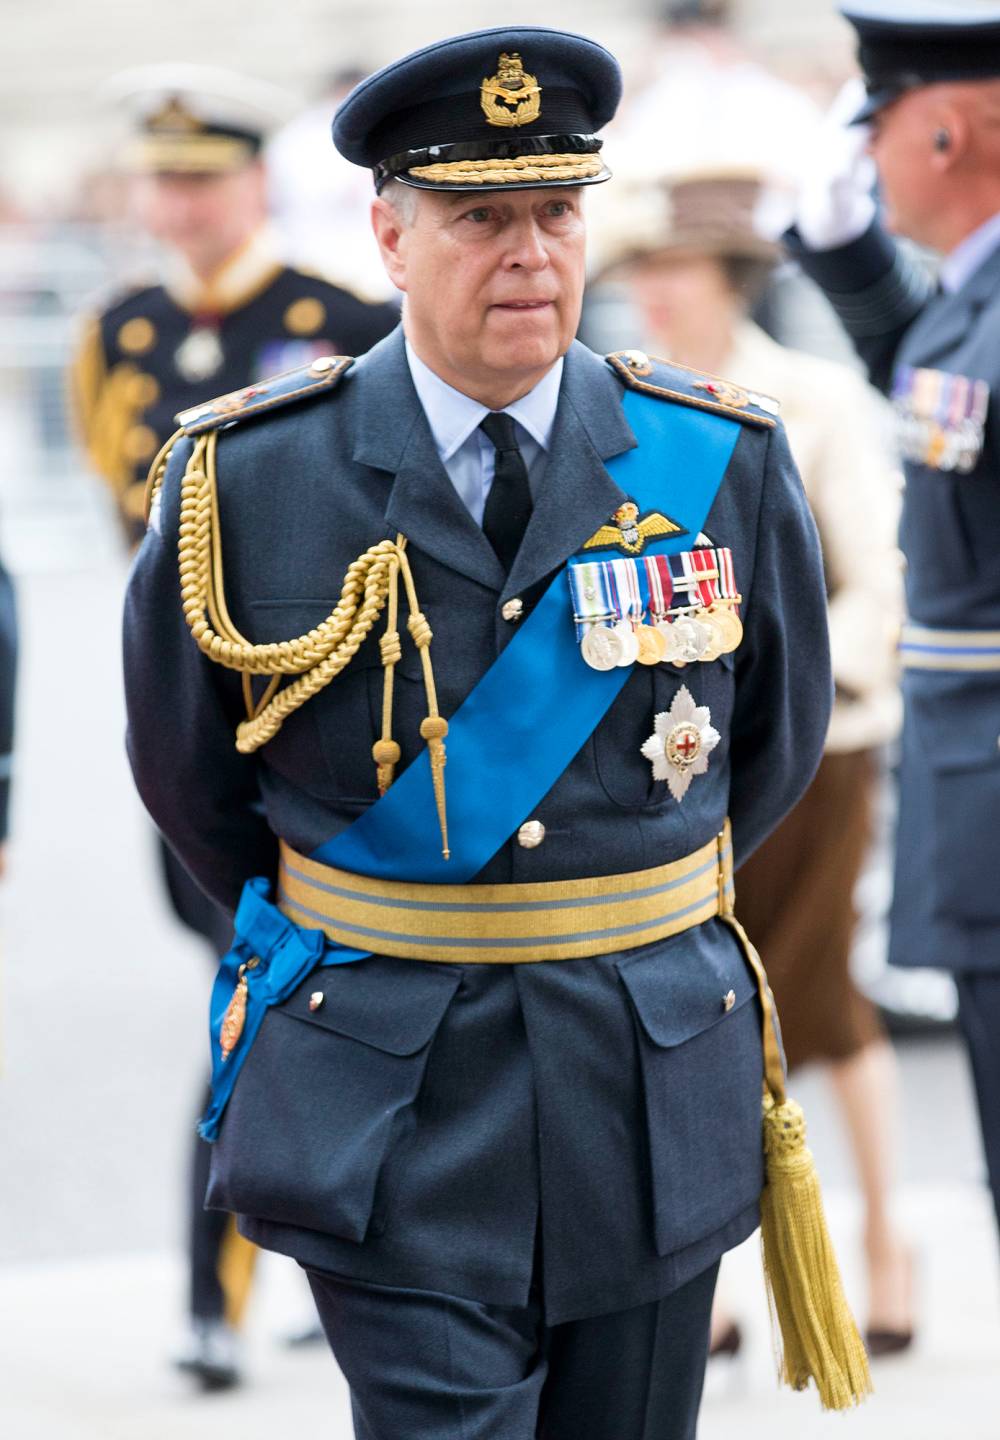 Prince Andrew Is Officially Stripped of Titles Amid Sexual Assault Lawsuit